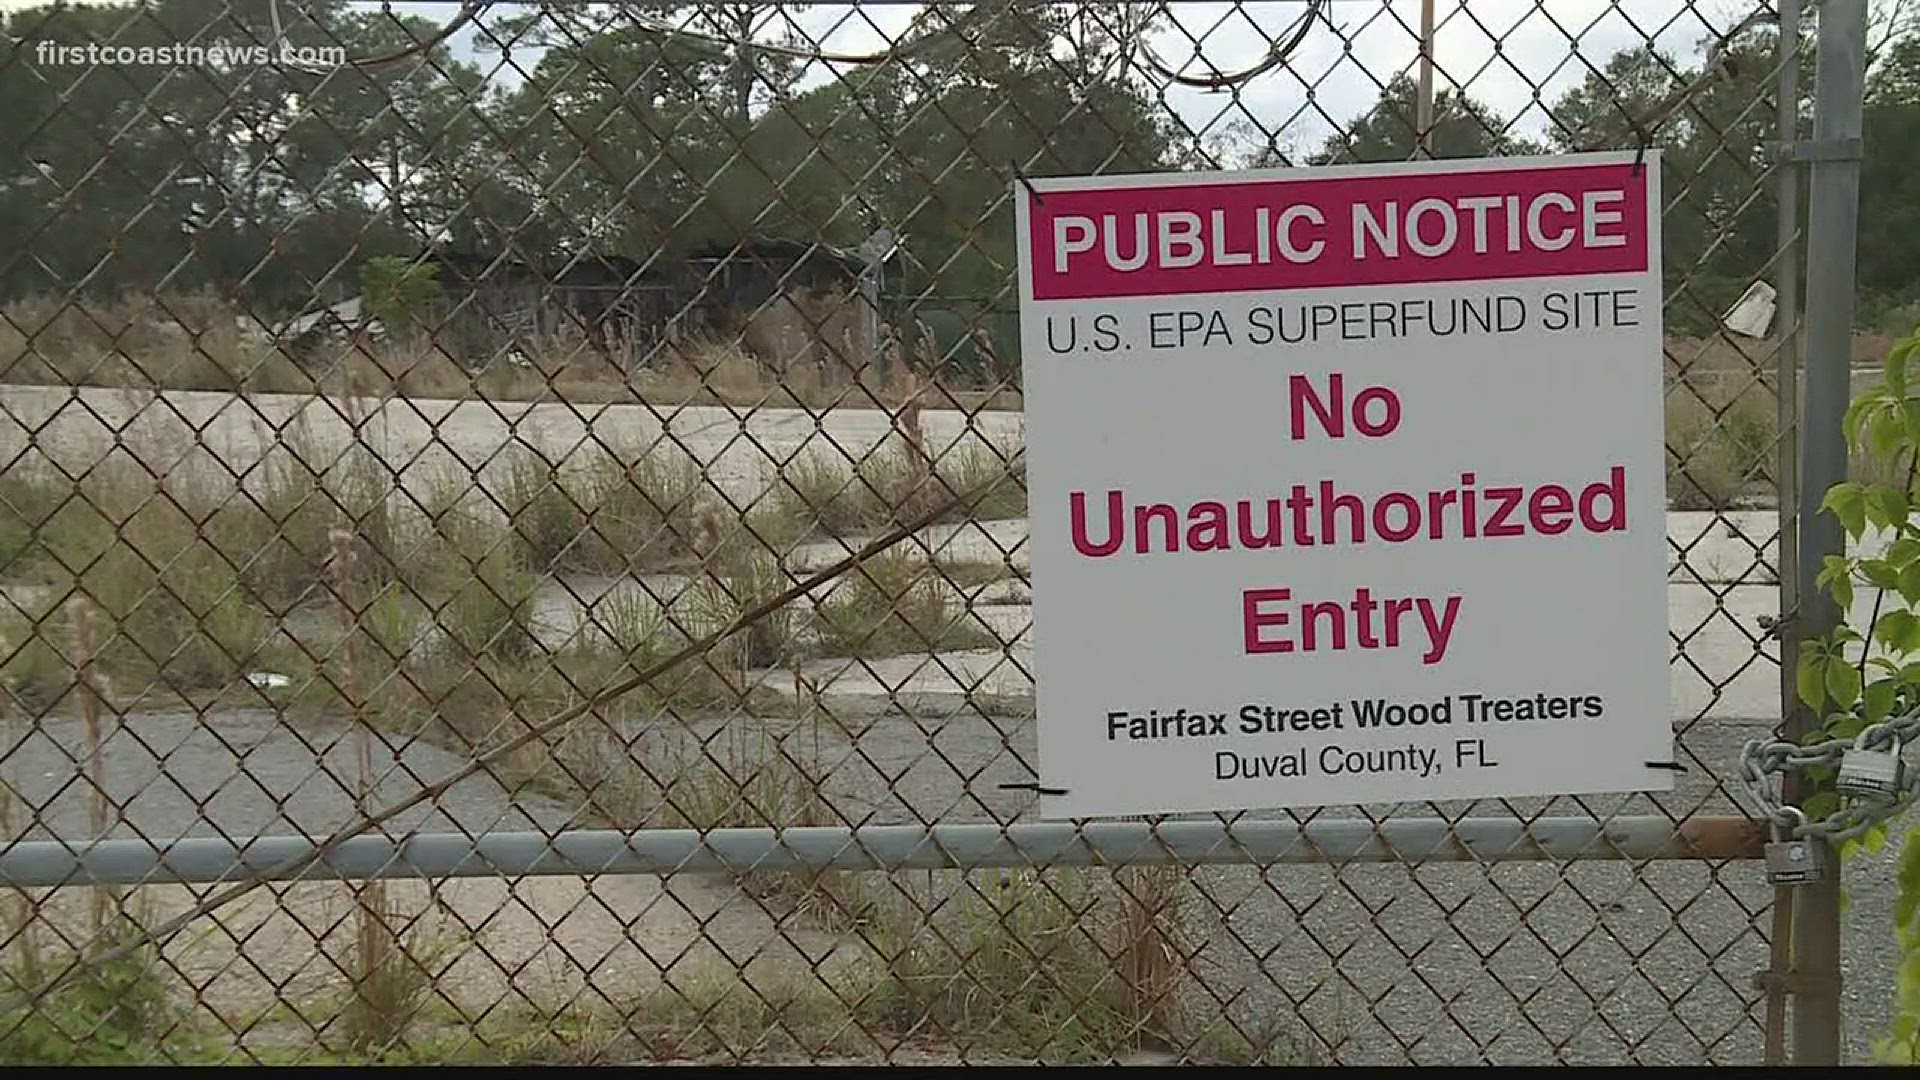 The EPA plans to clean up the Fairfax Street Wood treaters in Northwest Jacksonville, which sits next to two elementary schools. Fairfax Environmental Committee wants the schools closed.